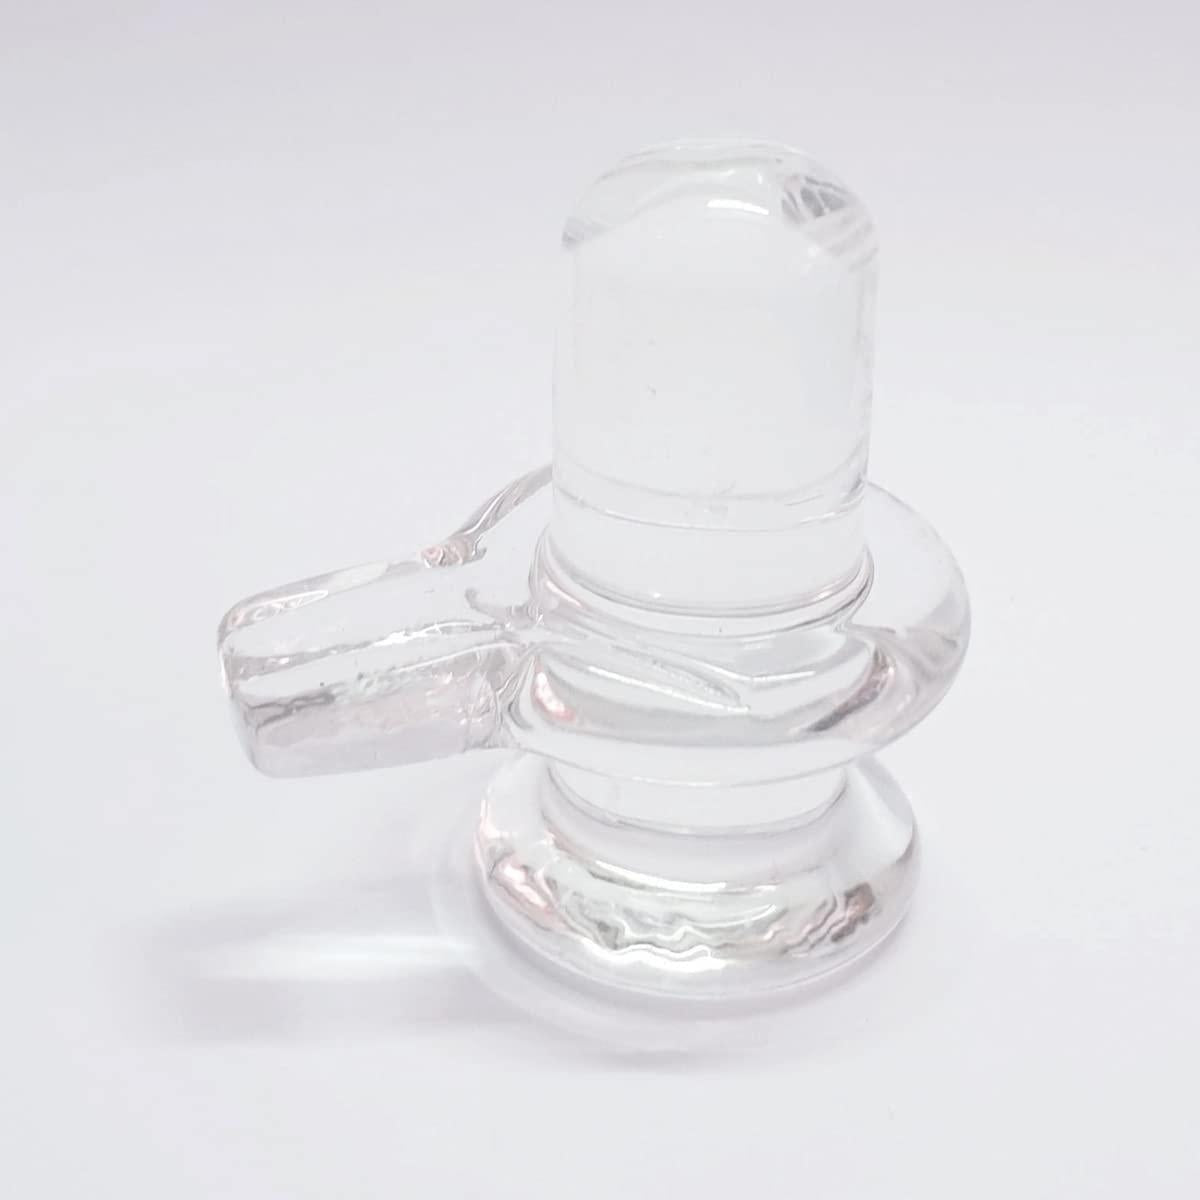 Sphatik Shivling/Big Size for Home Pooja Decorative Showpiece - 4 inch, 250gm (Crystal, White)�